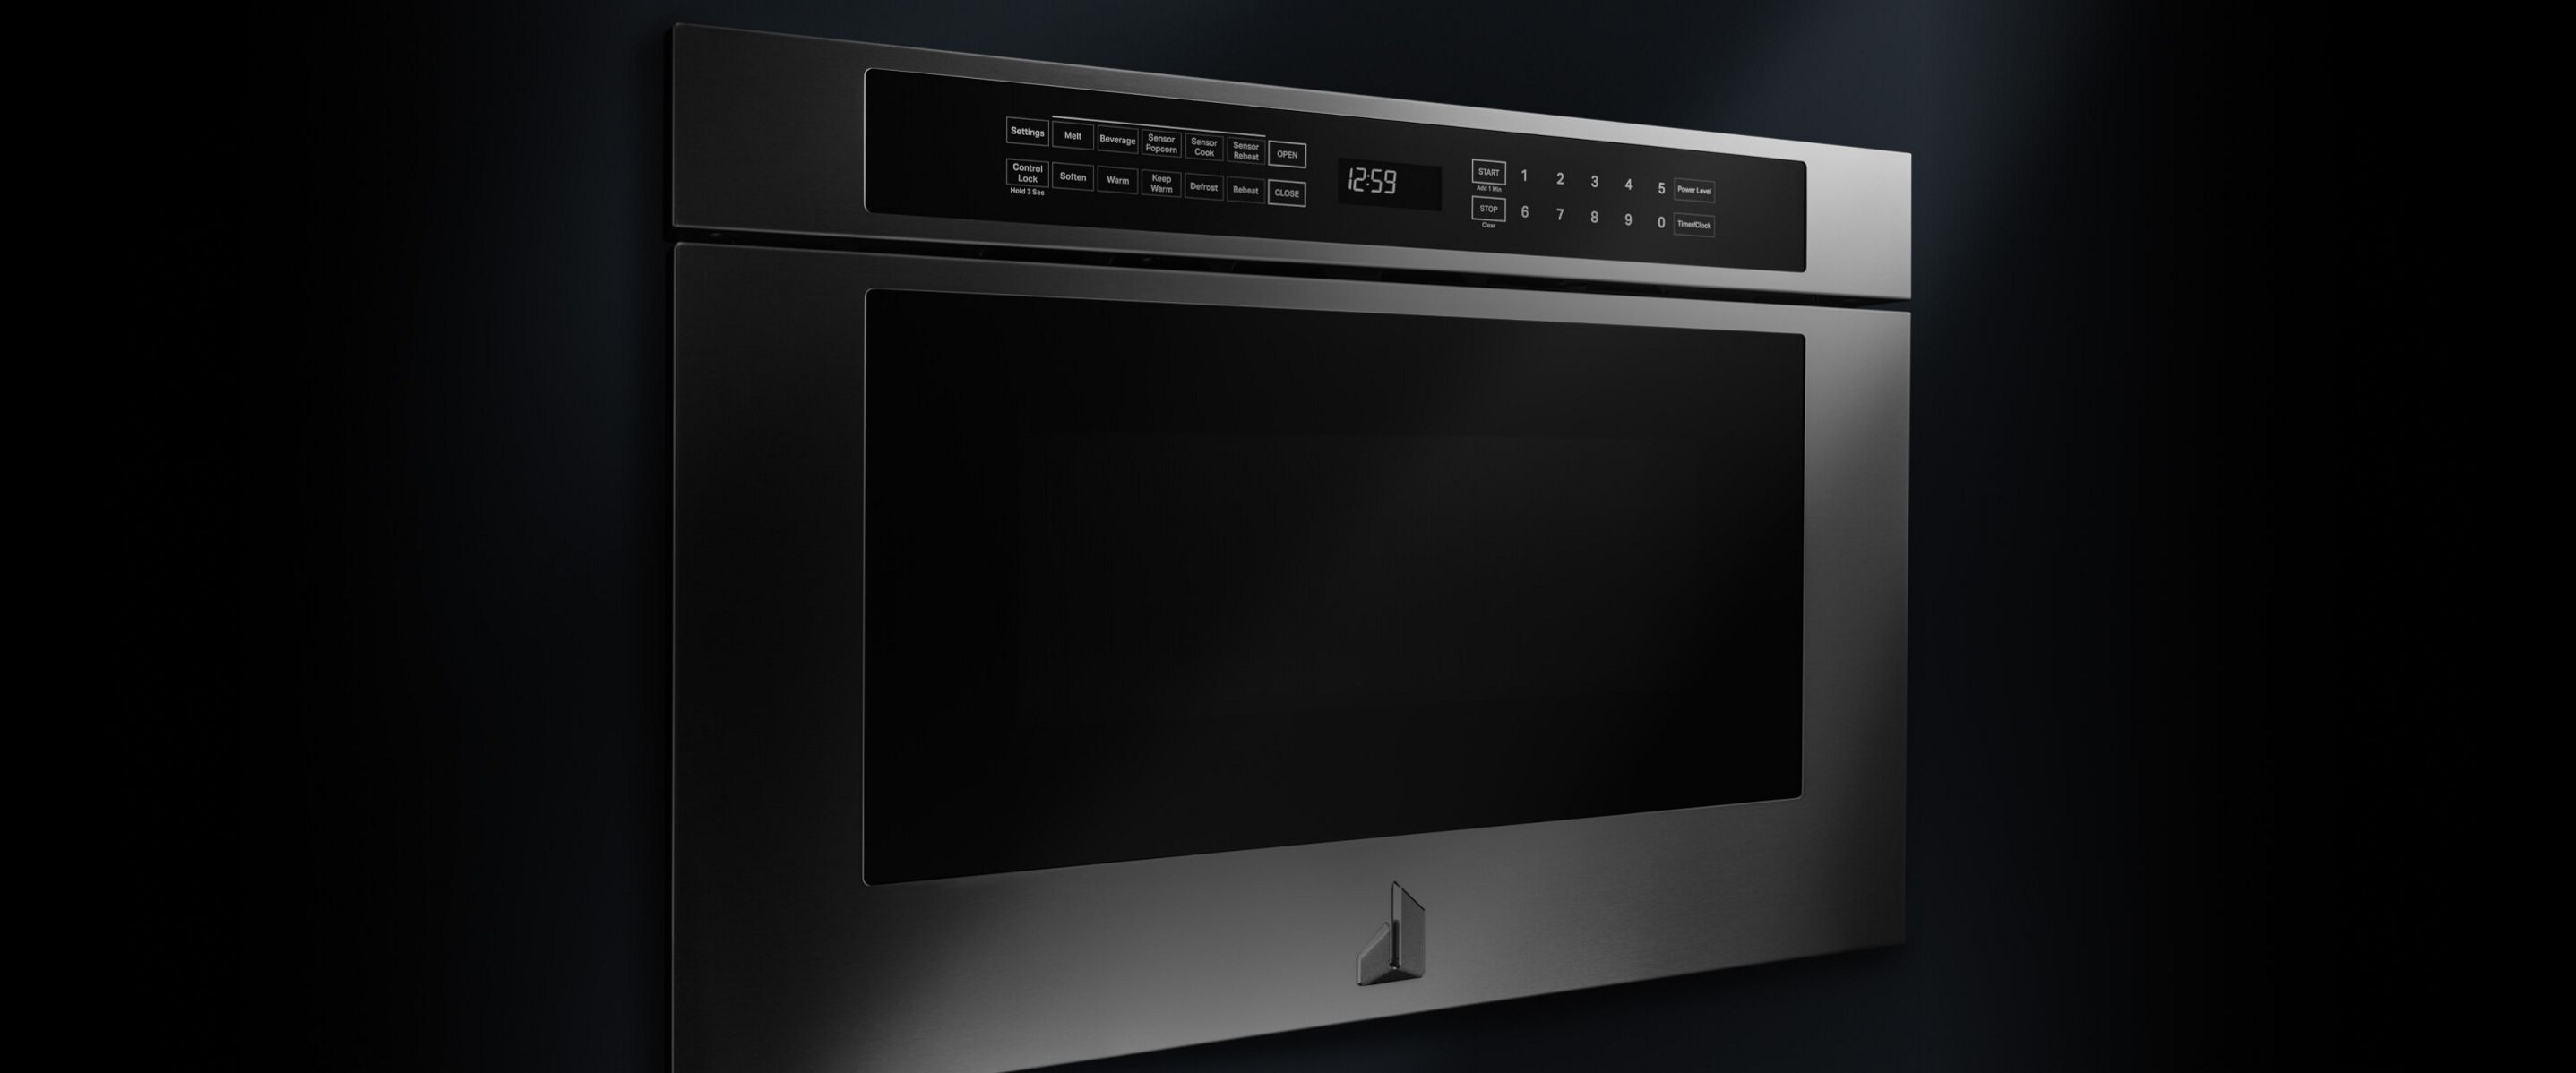 A JennAir® Built-In Microwave, also called a Speed Oven.